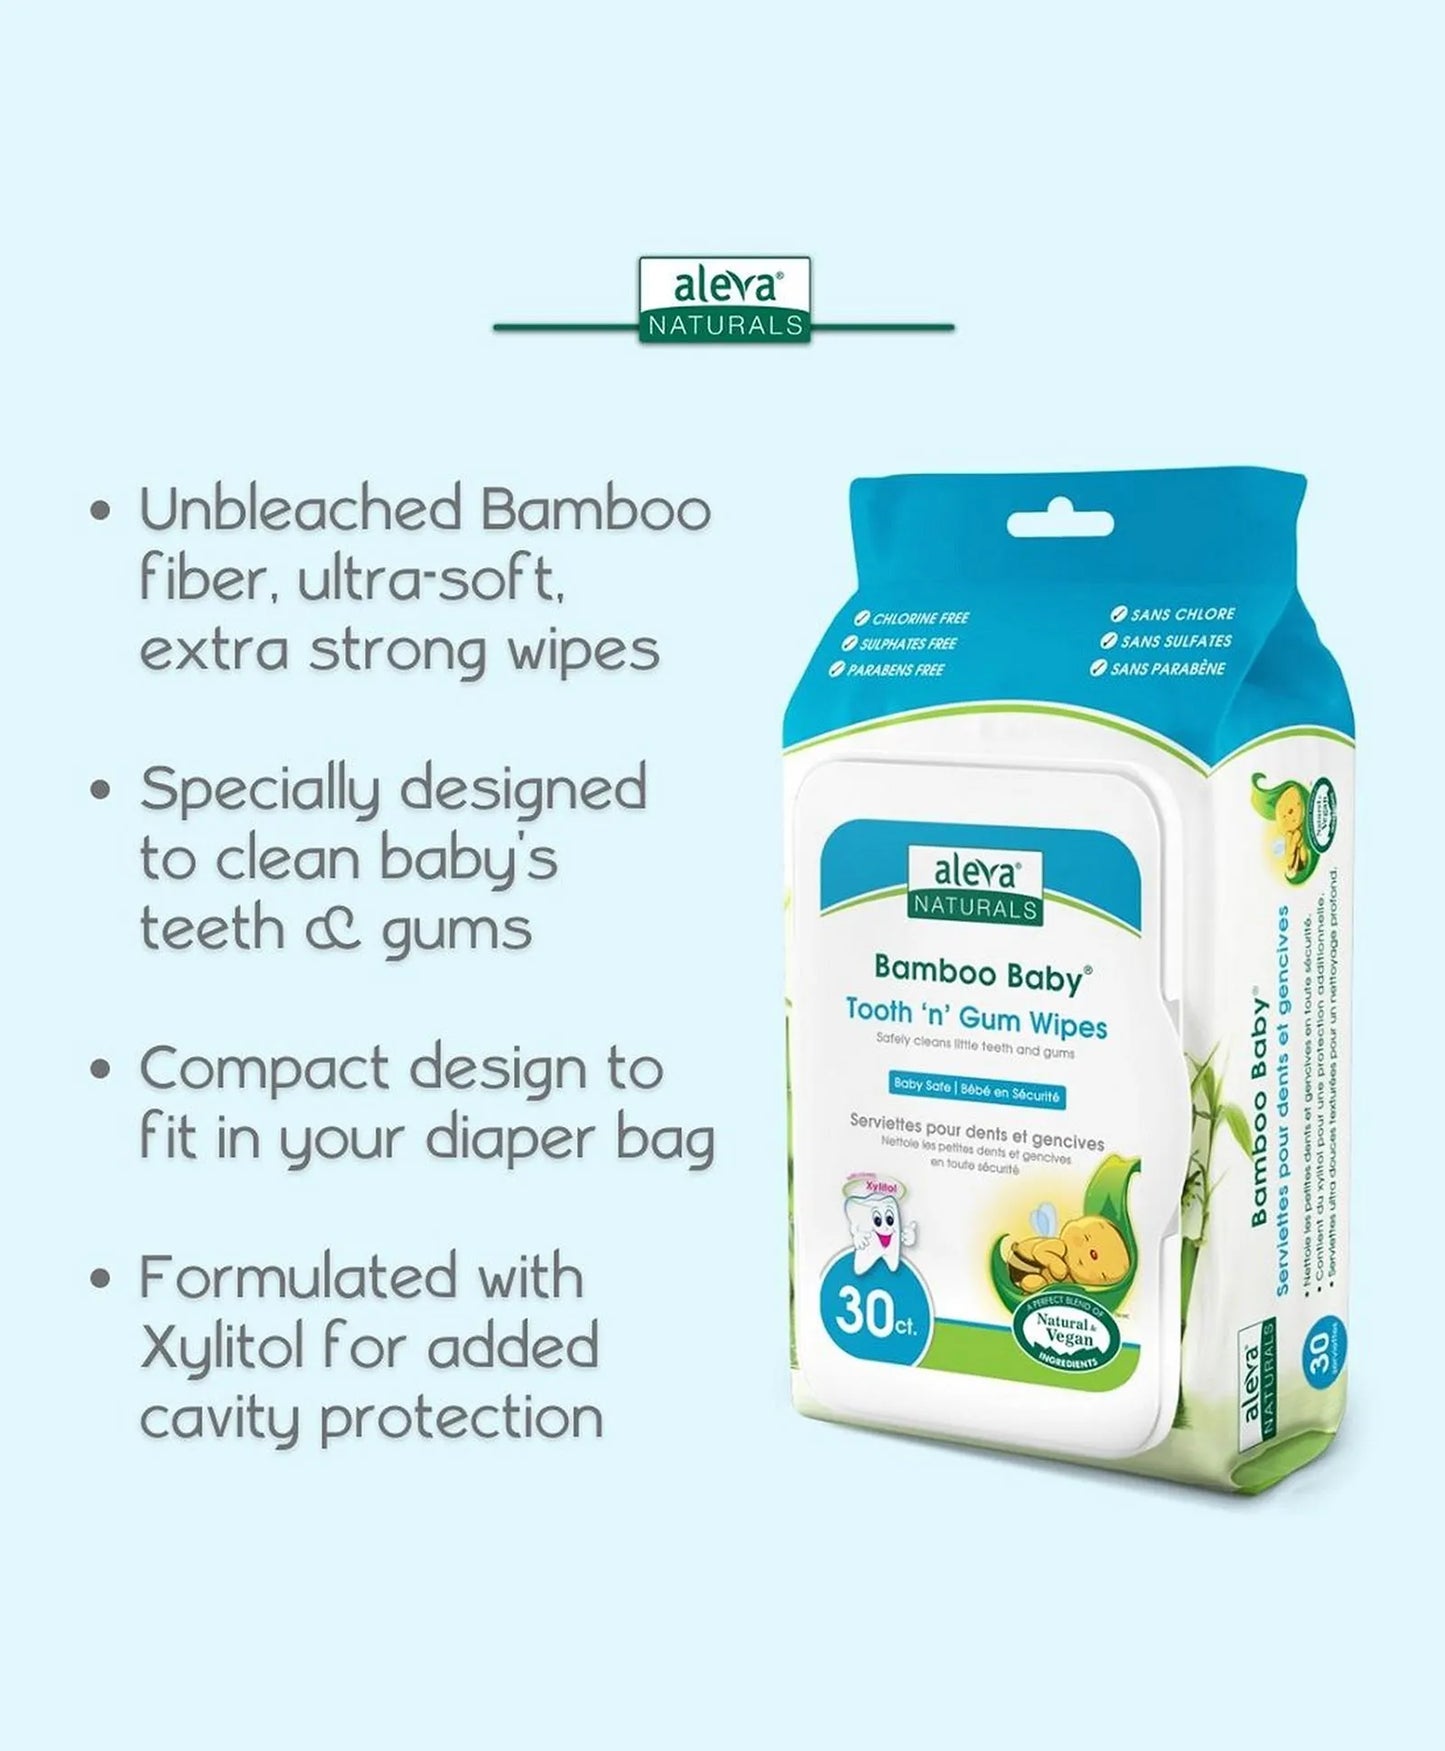 Aleva Naturals Bamboo Baby Specialty Tooth 'N' Gum Wipes - 30ct